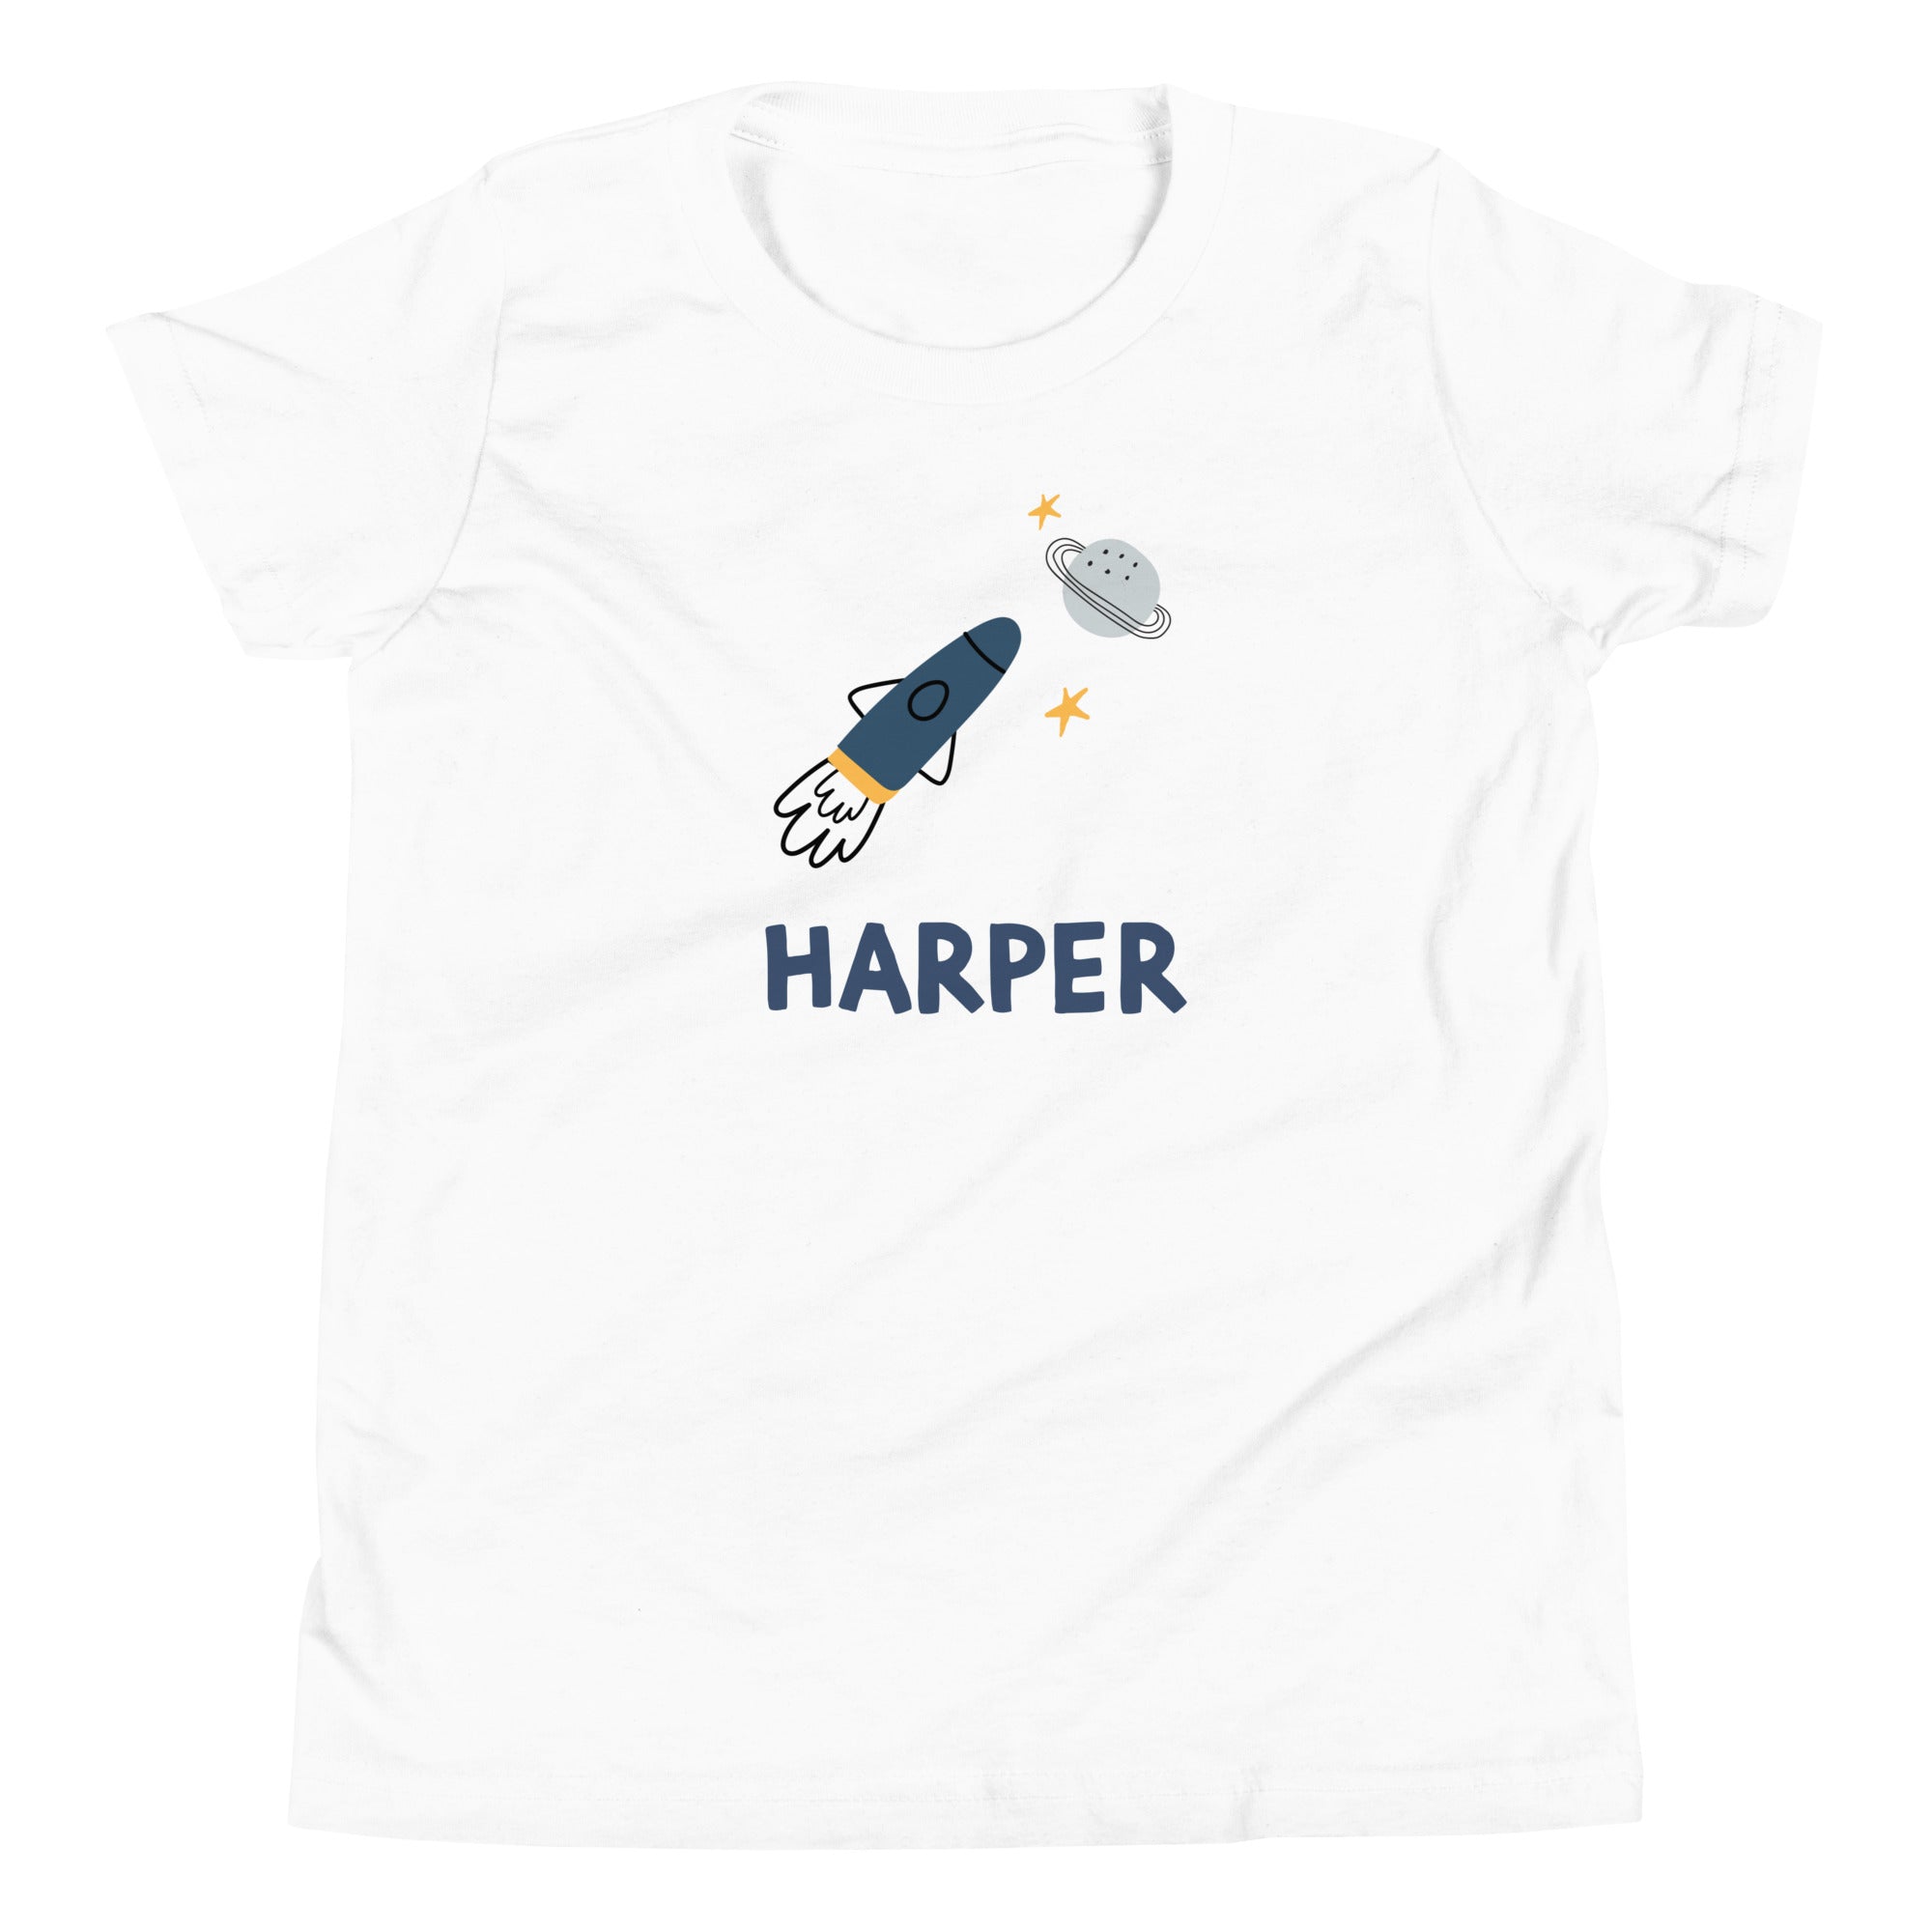 Personalized kids' tee with a rocket ship design